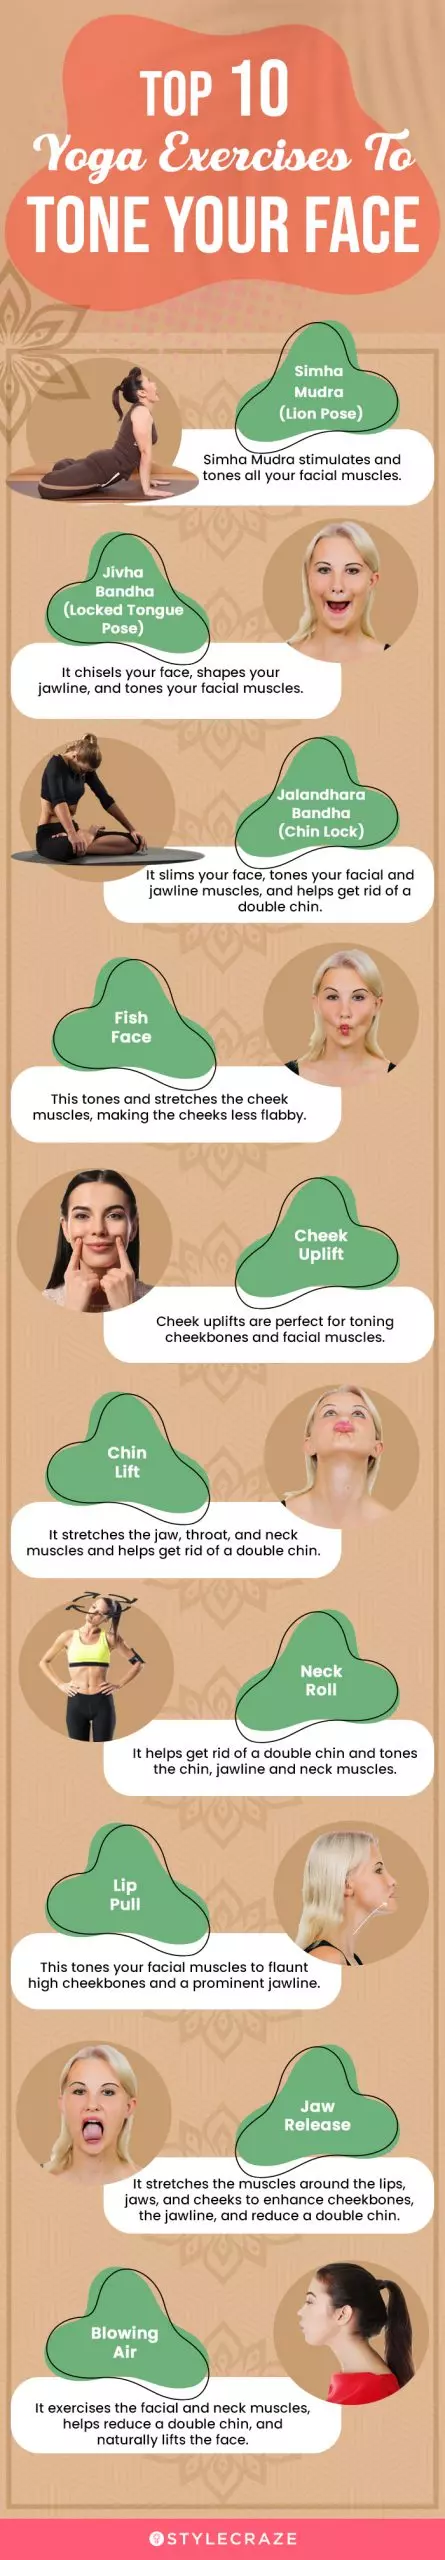 top 10 yoga exercises to tone your face (infographic)